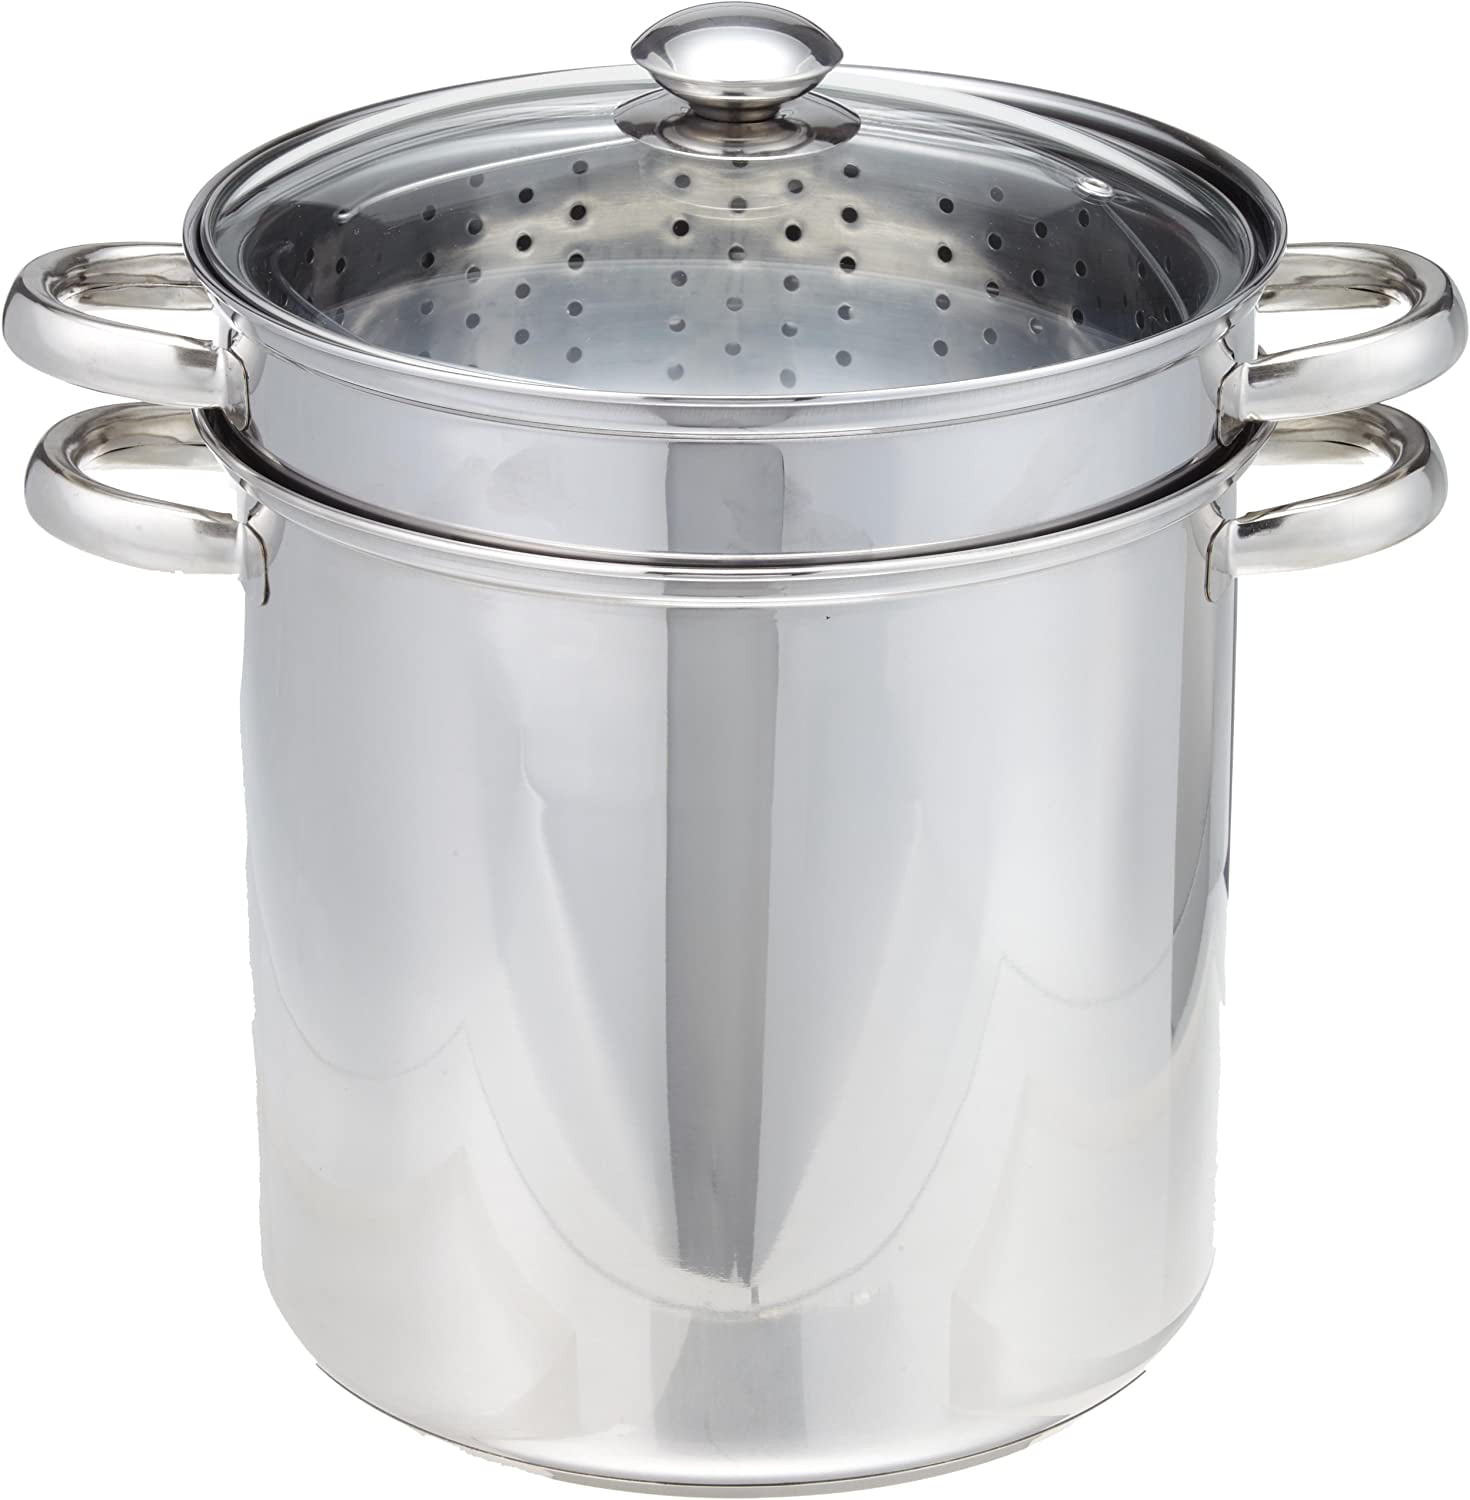 ExcelSteel 548 Stockpot with Encapsulated Base 8 quarts Silver 